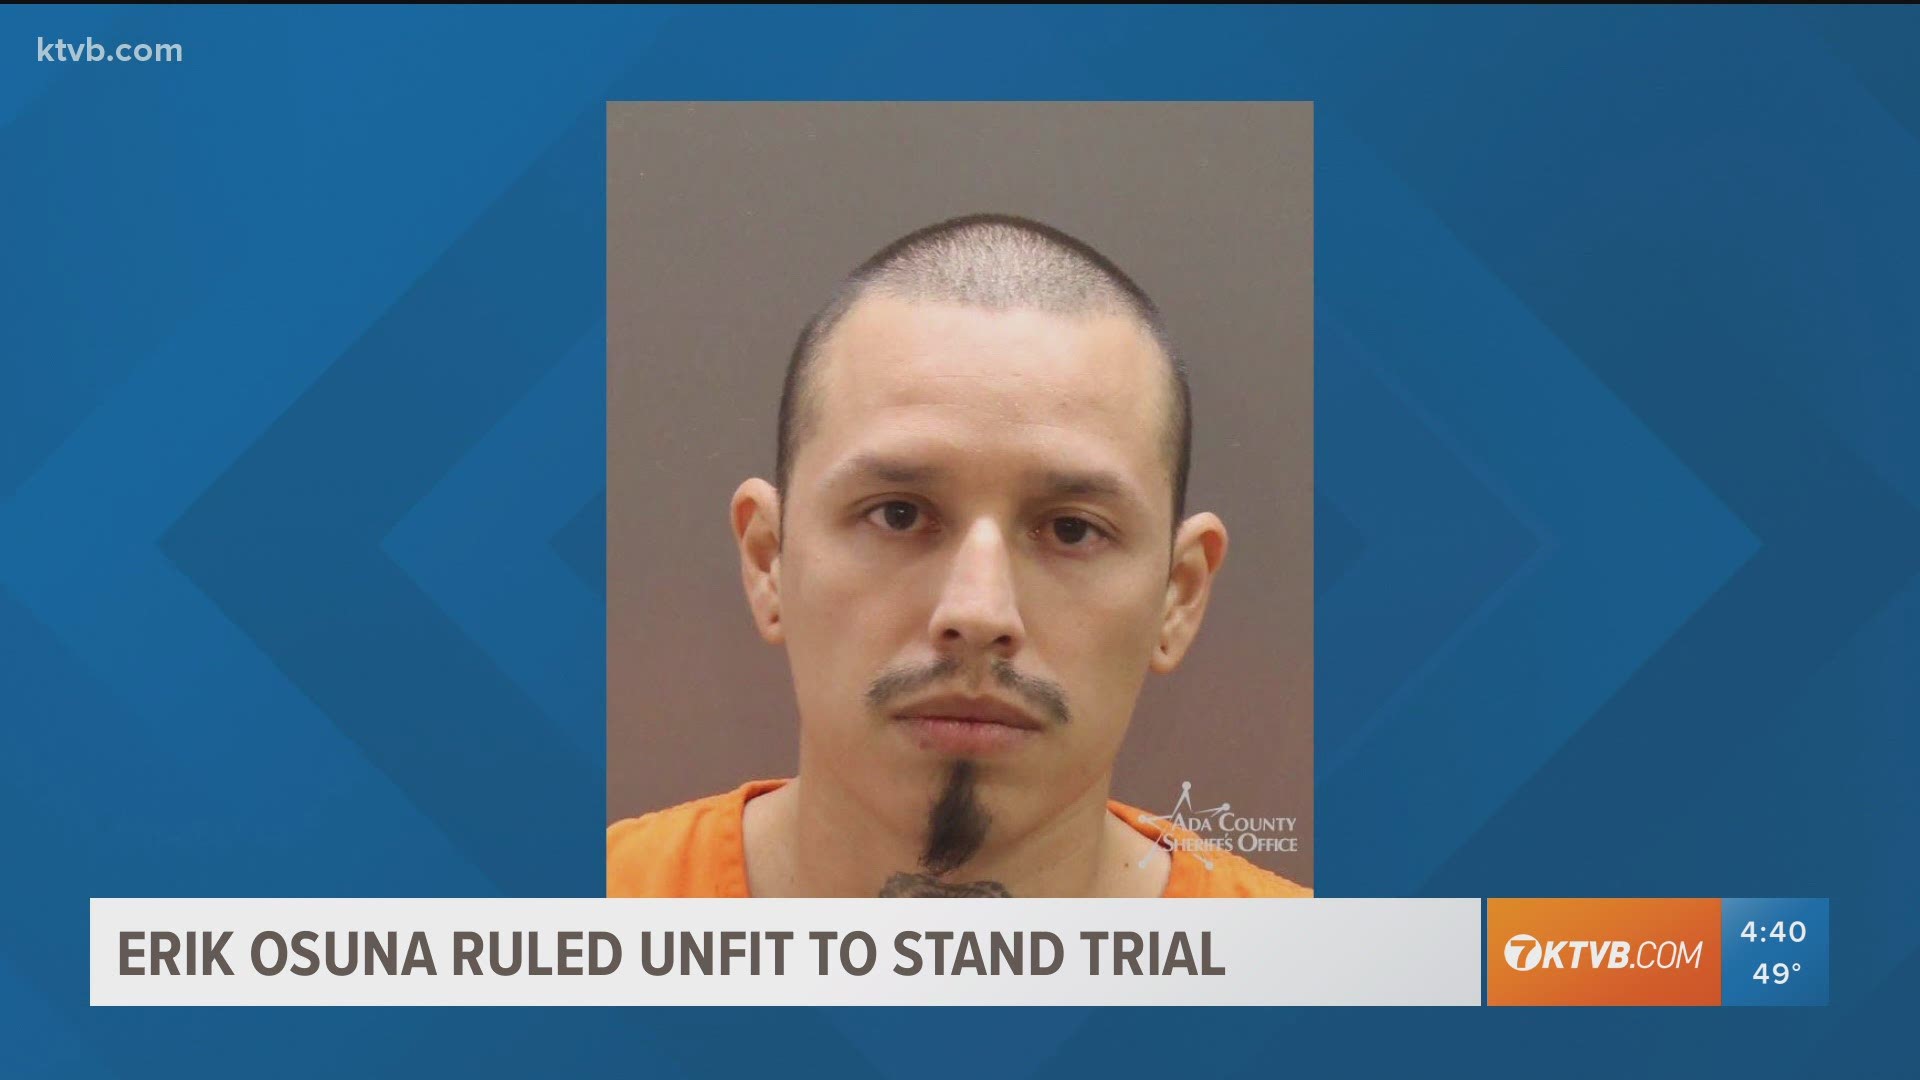 Erik Osuna is facing a first-degree murder charge in the death of his son Emrik Osuna. Prosecutors say the 9-year-old boy died after months of abuse.